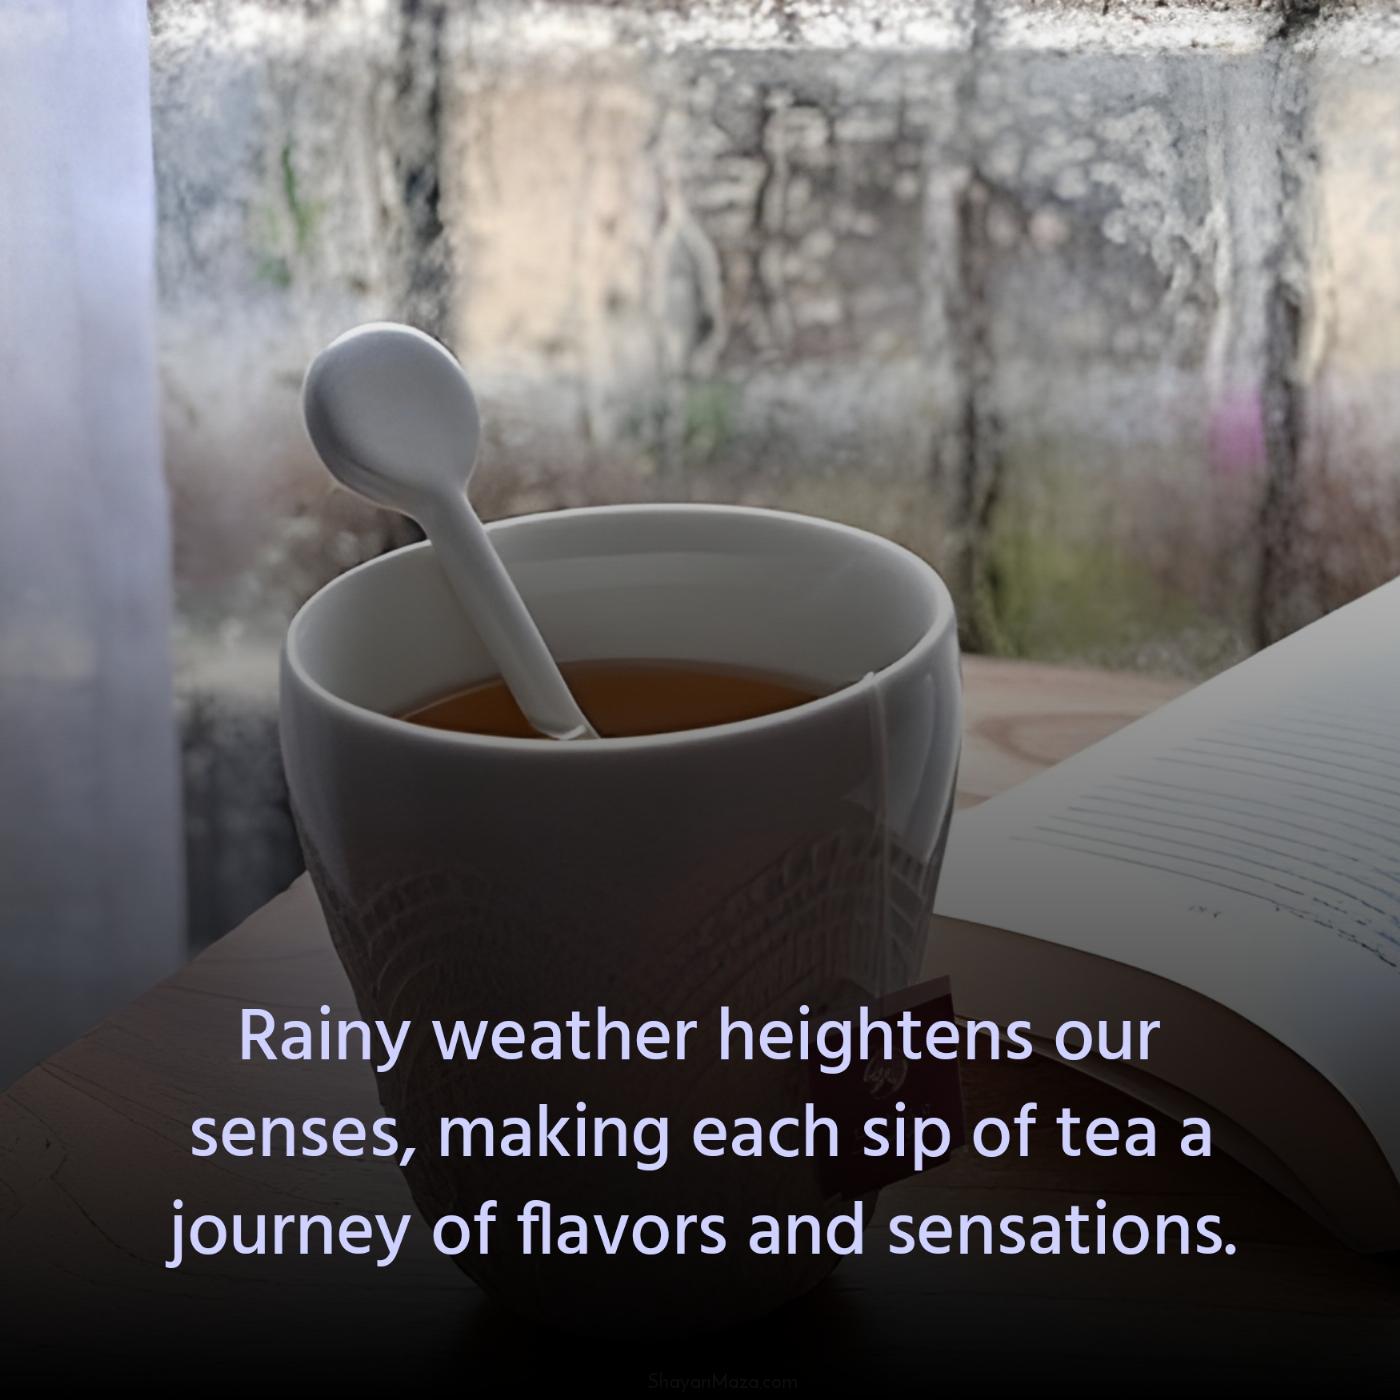 Rainy weather heightens our senses making each sip of tea